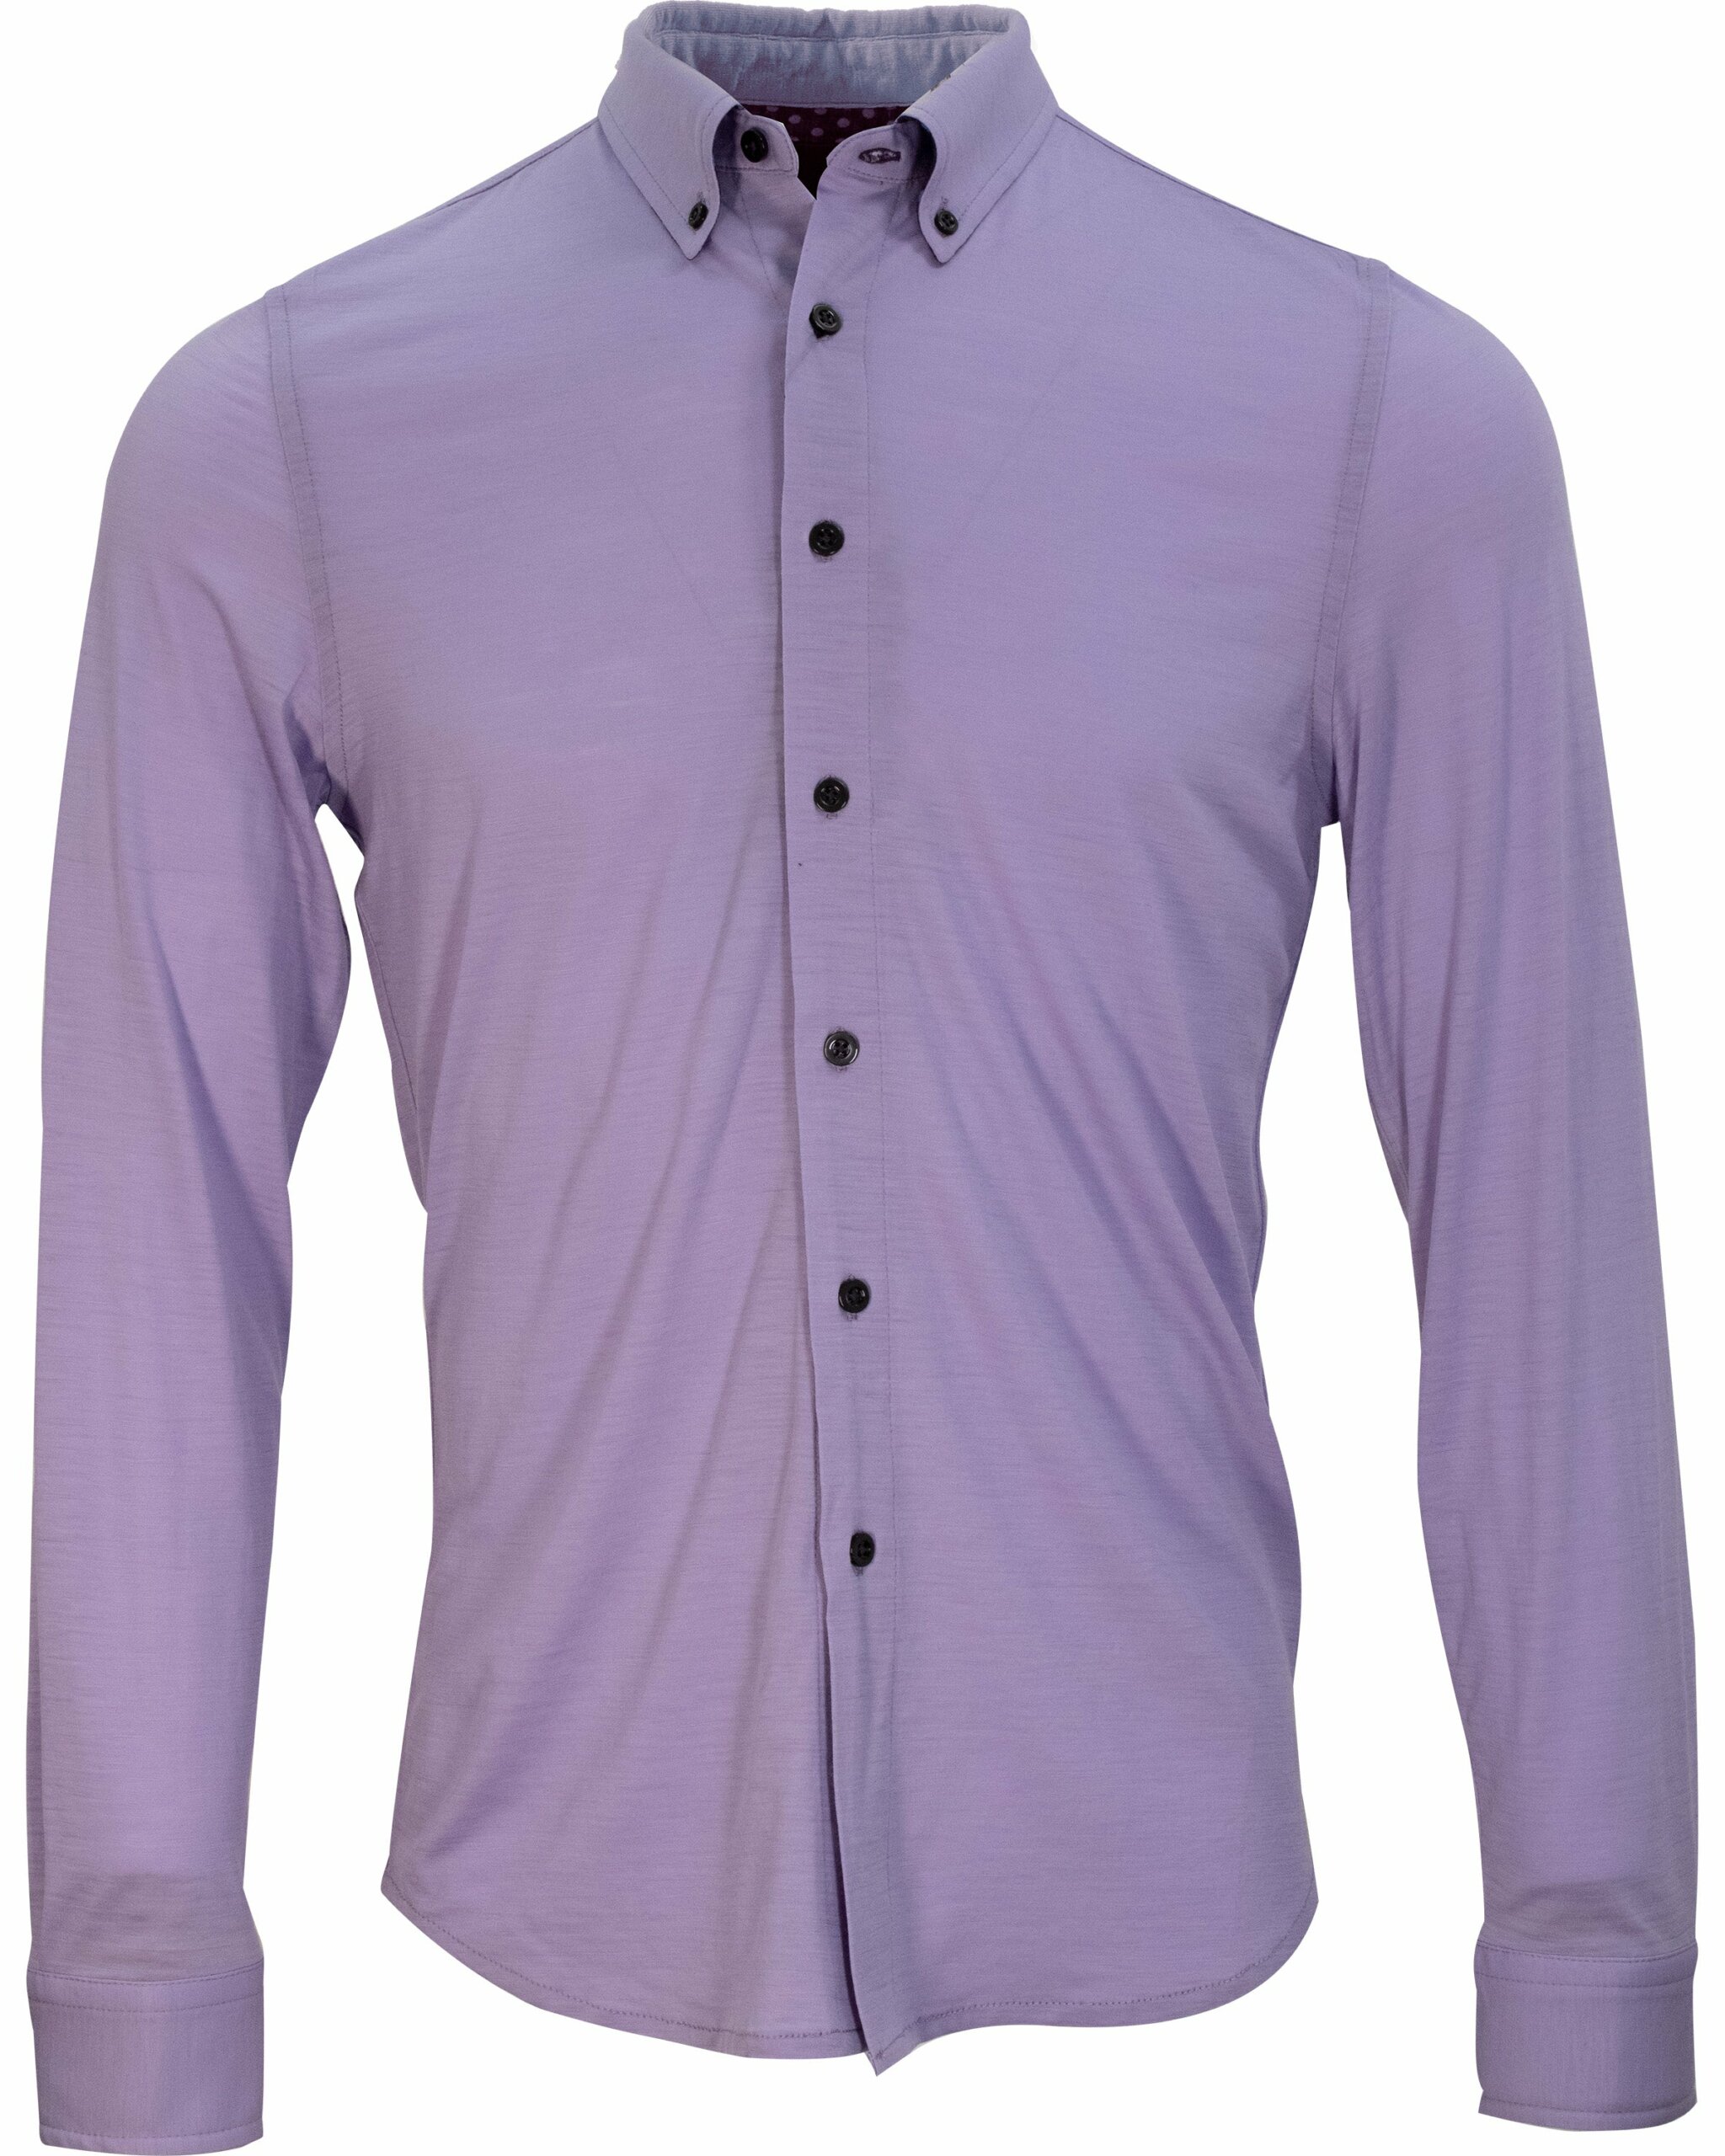 Men's Pink / Purple Shawn Merino Shirt In Lavender Small Lords of Harlech